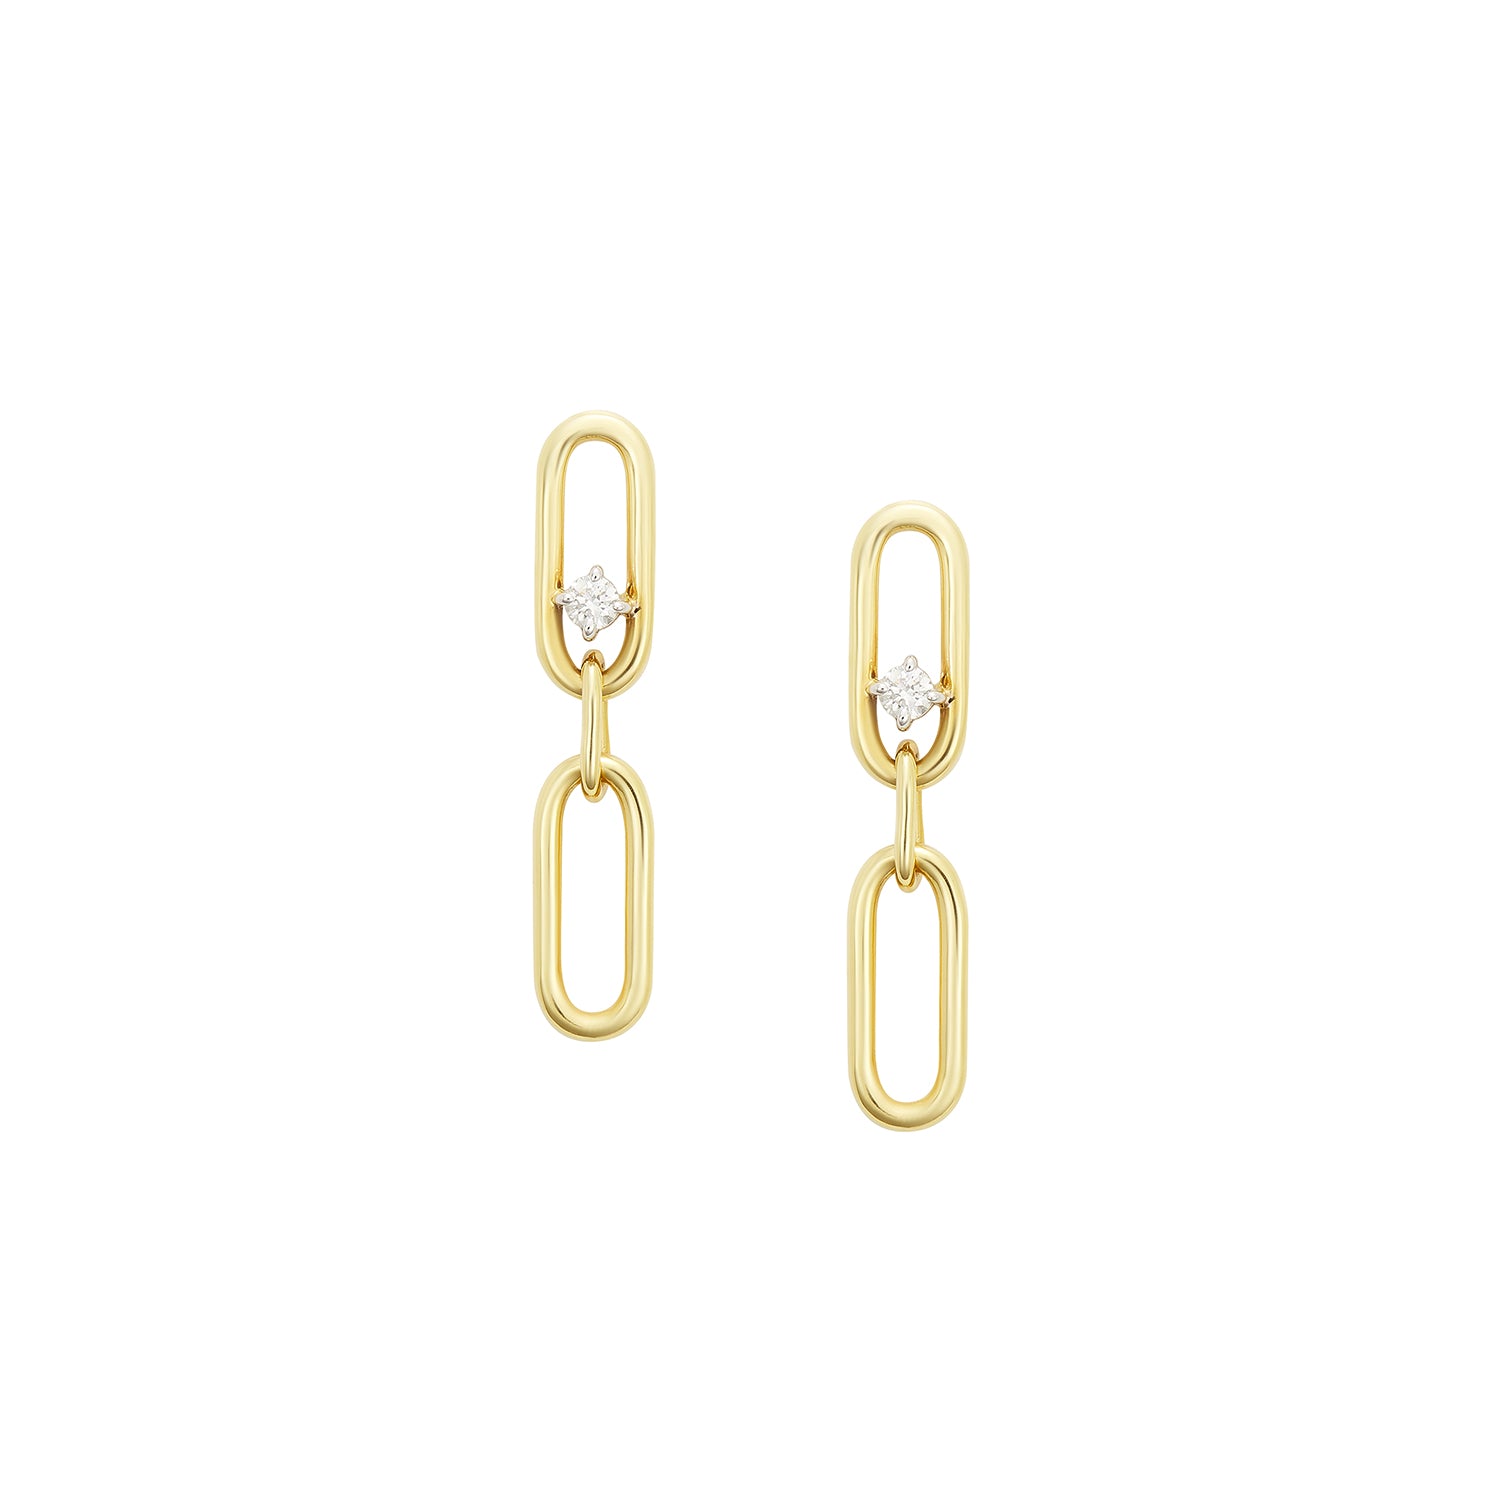 Paperclip earrings with diamonds